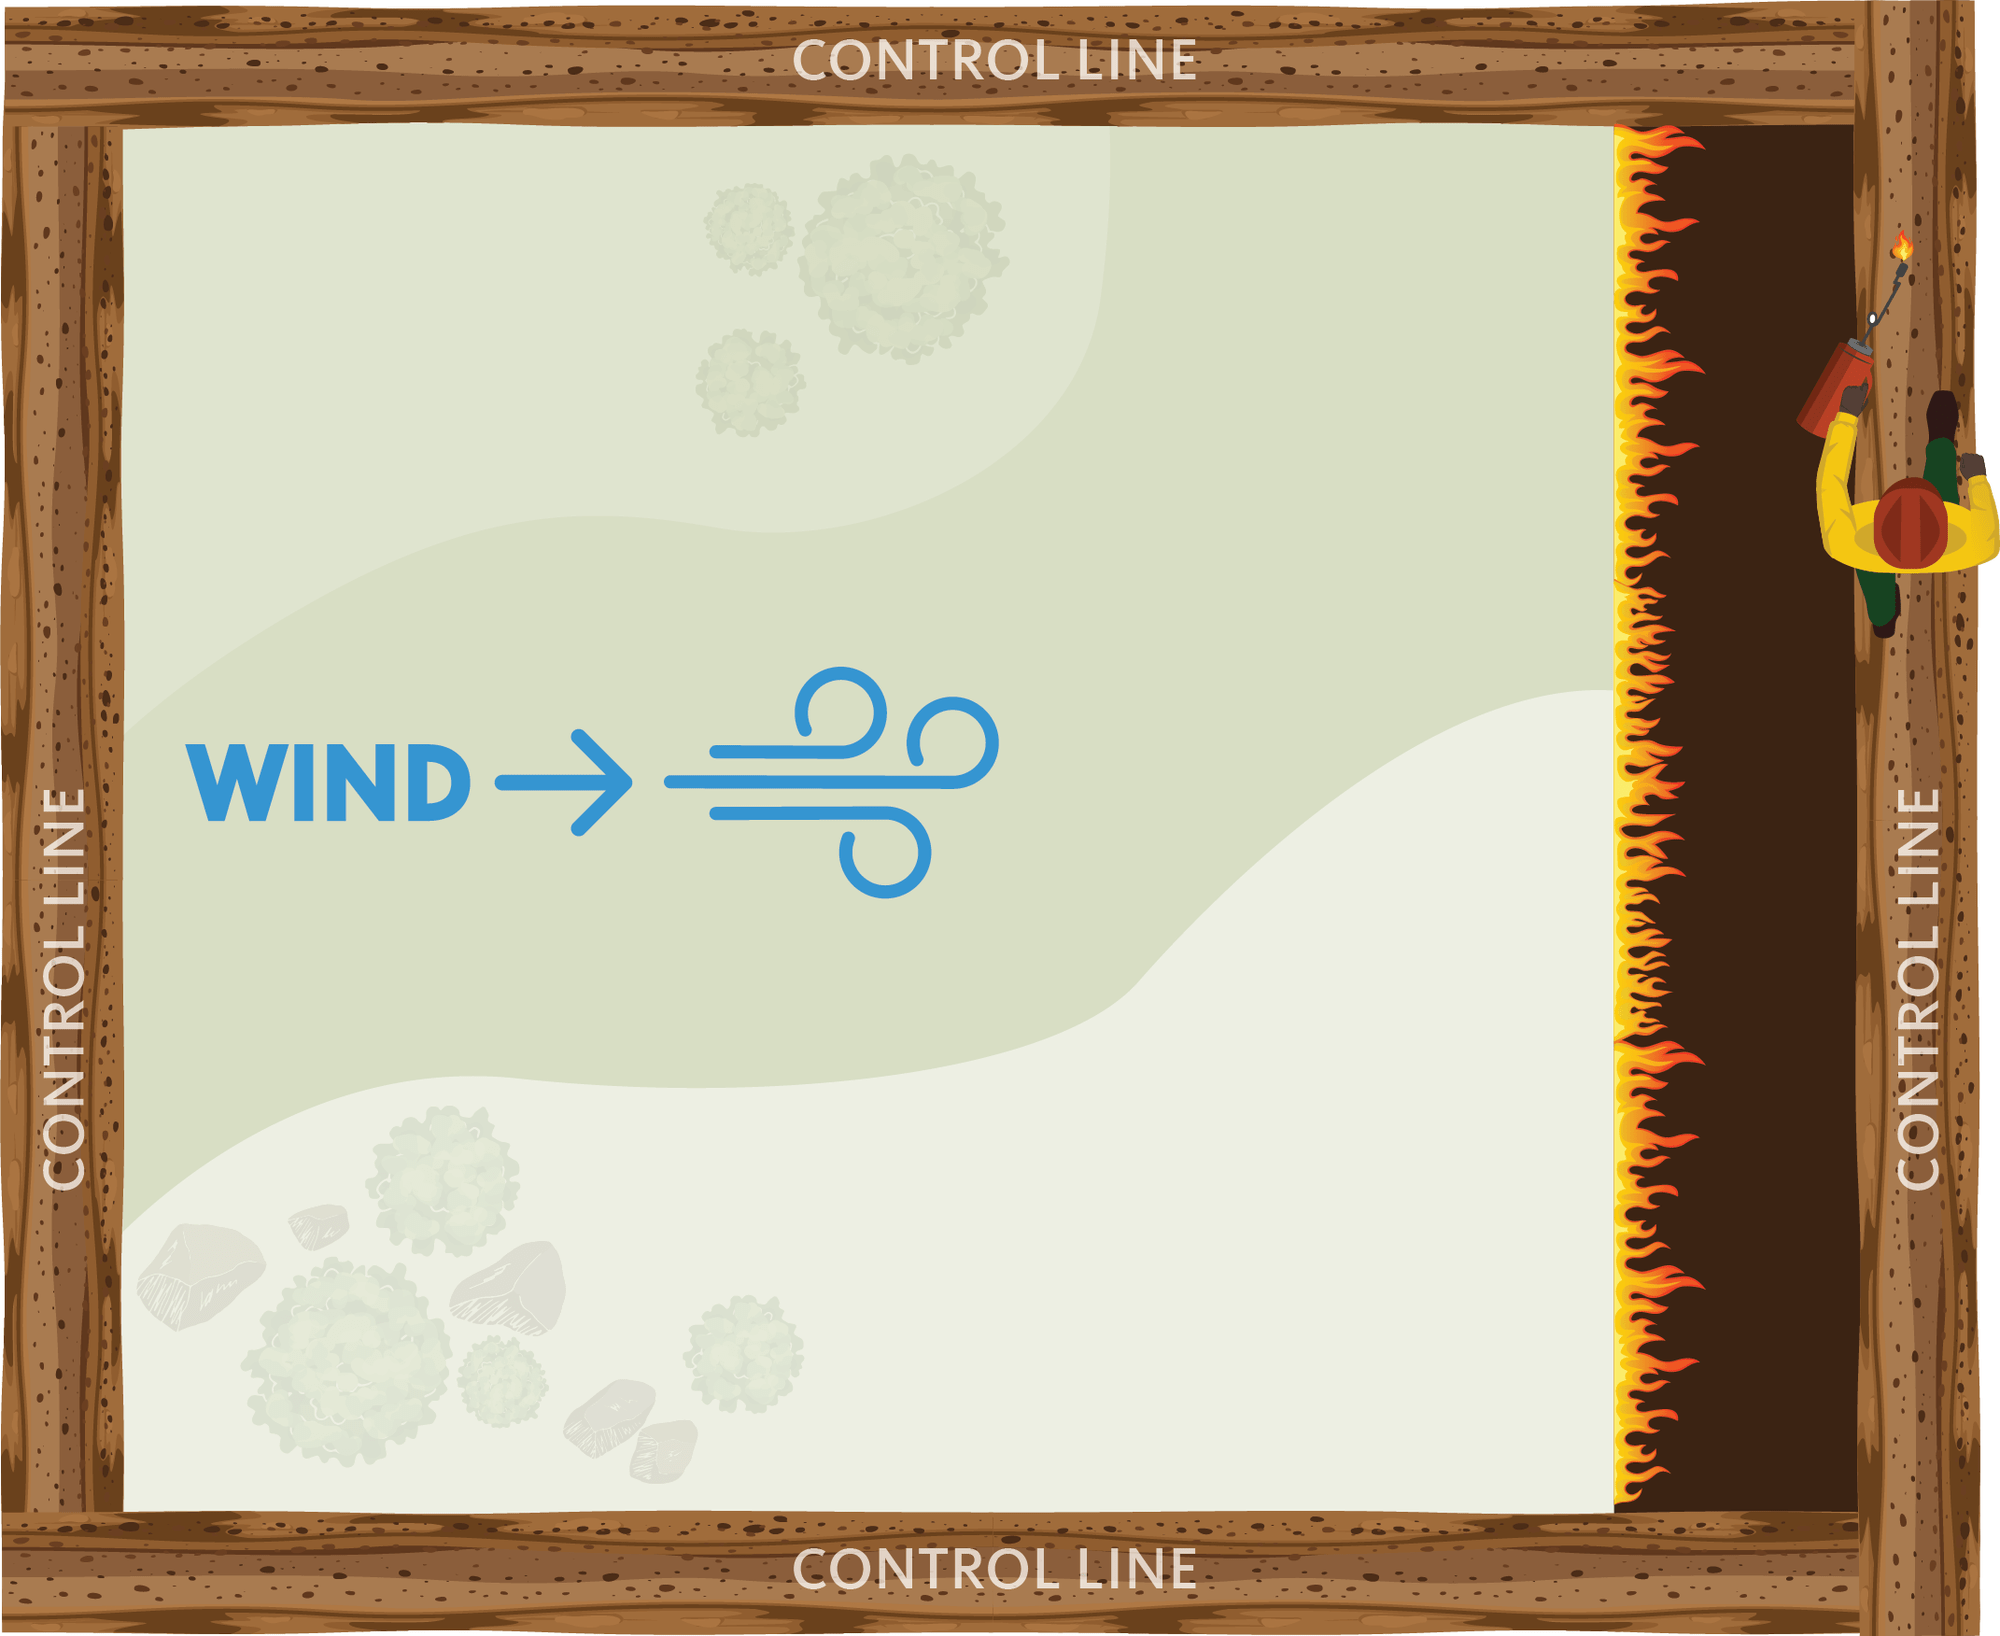 Illustration showing wind acting on fire line